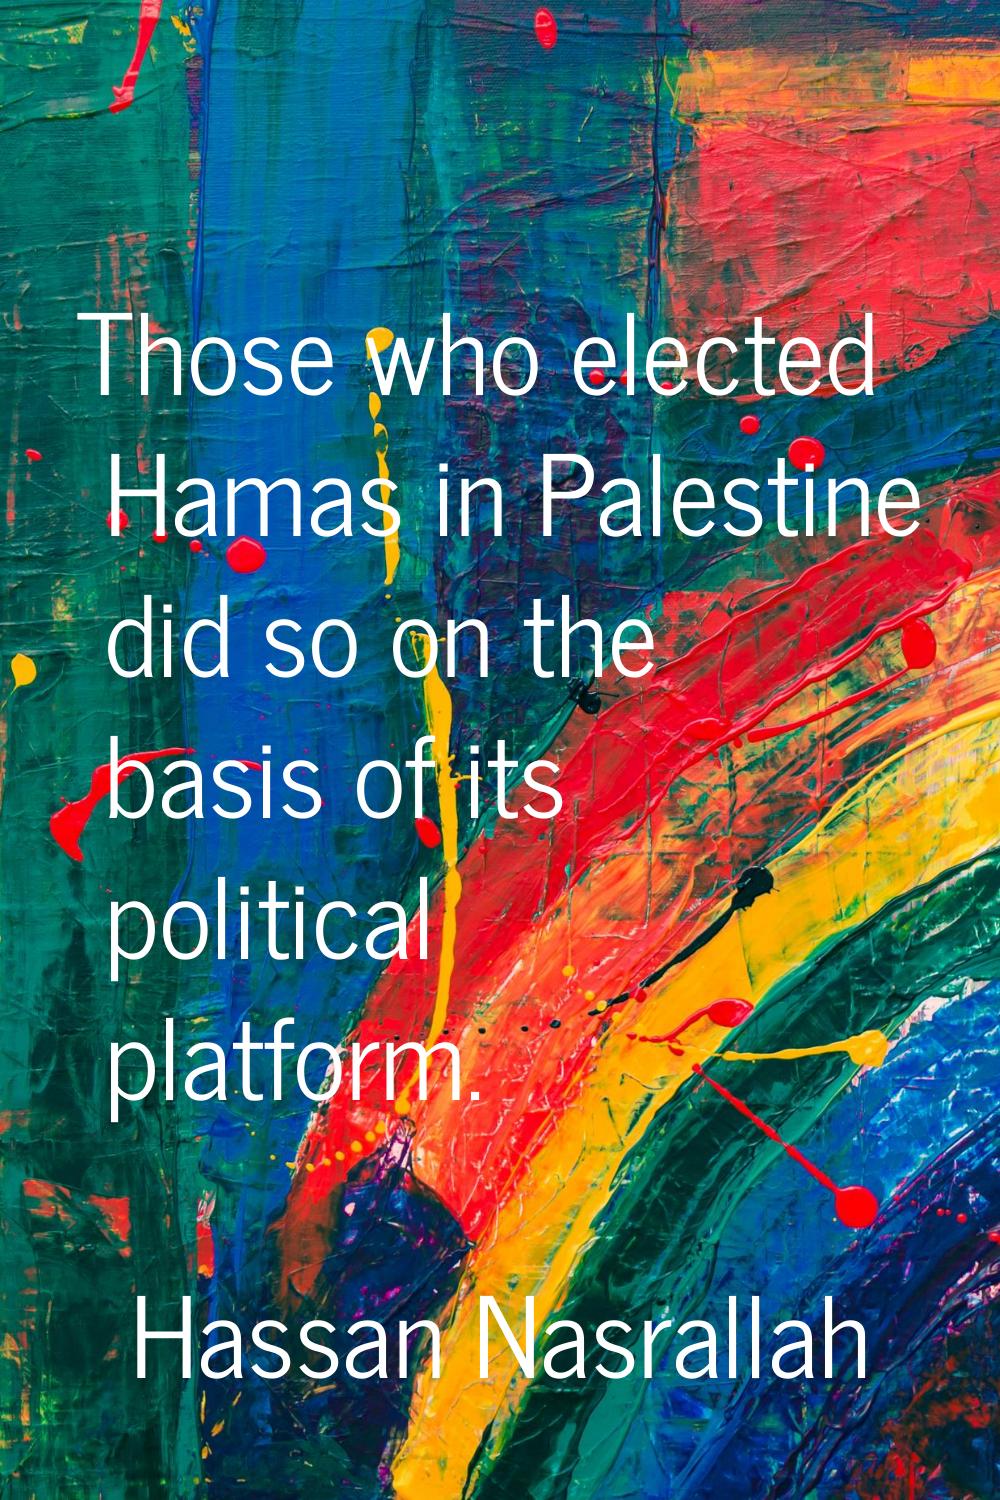 Those who elected Hamas in Palestine did so on the basis of its political platform.